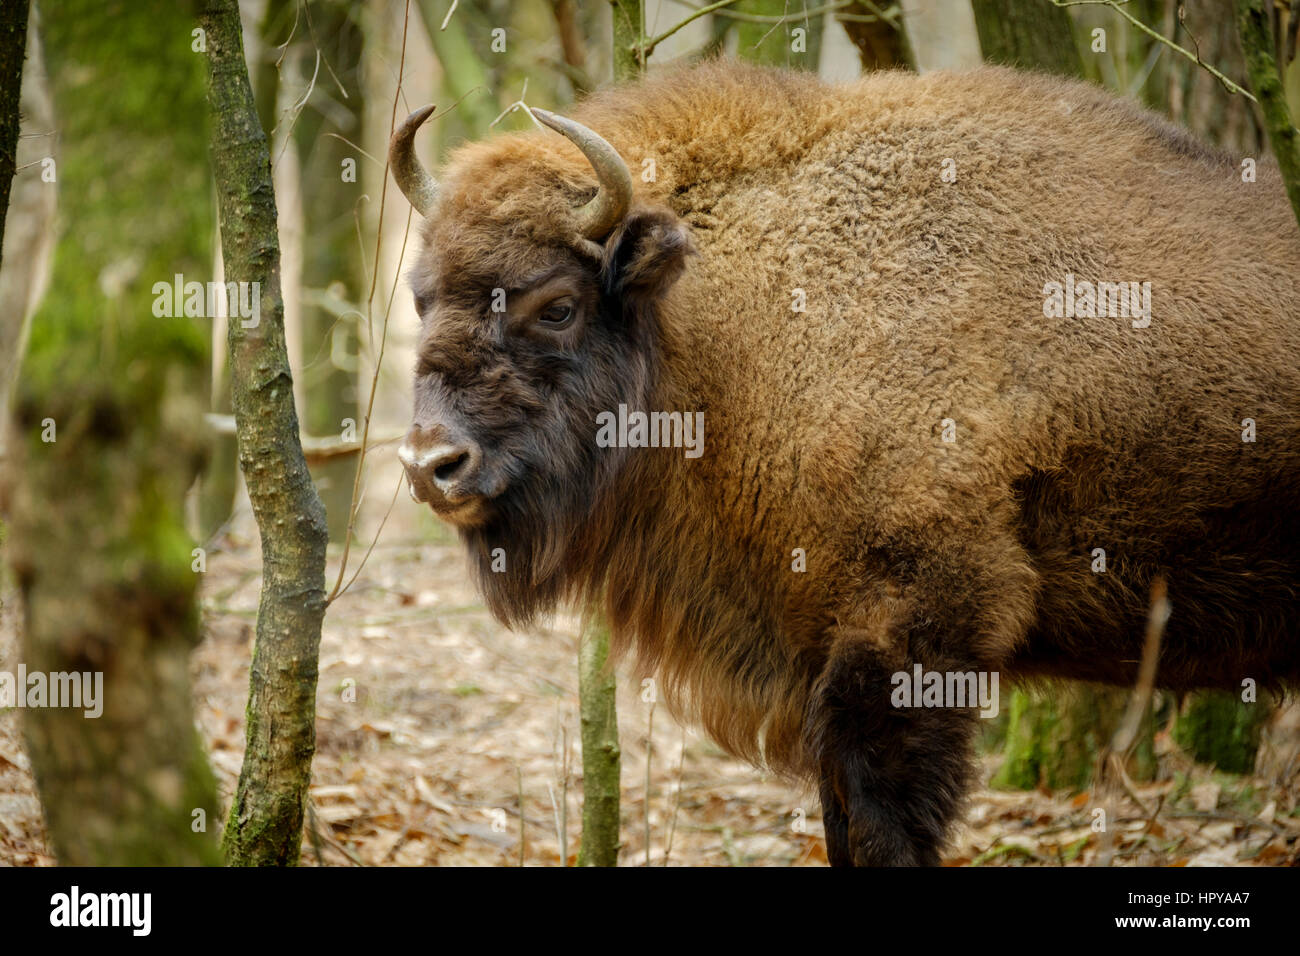 a wisent The European bison stands in the natural park of the Maashorst, Netherlands Stock Photo